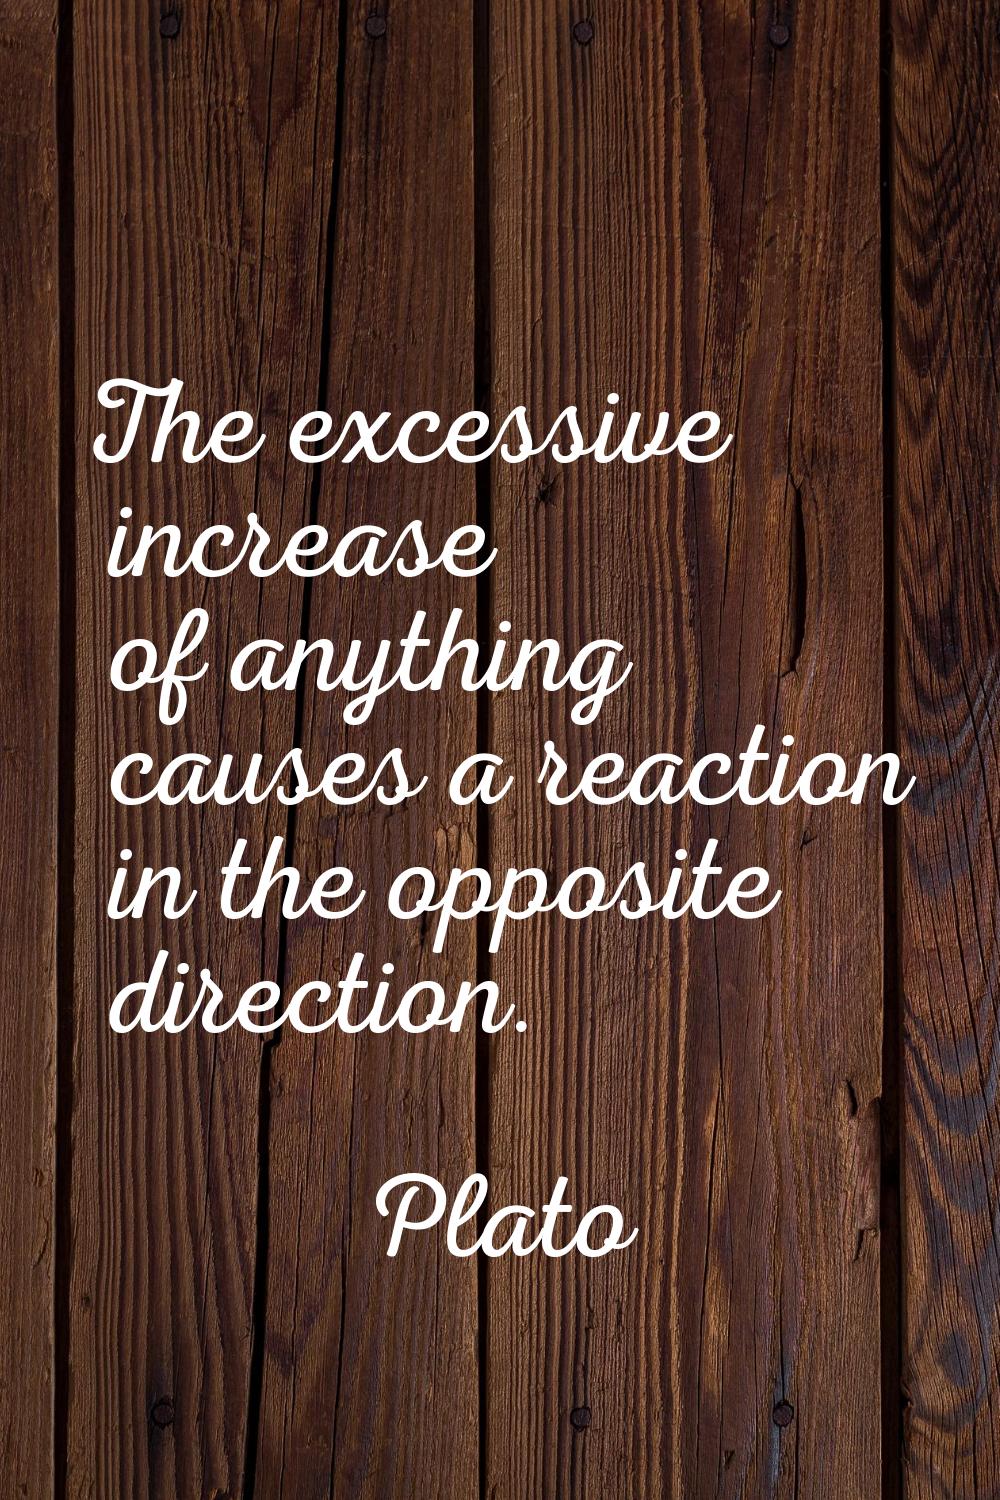 The excessive increase of anything causes a reaction in the opposite direction.